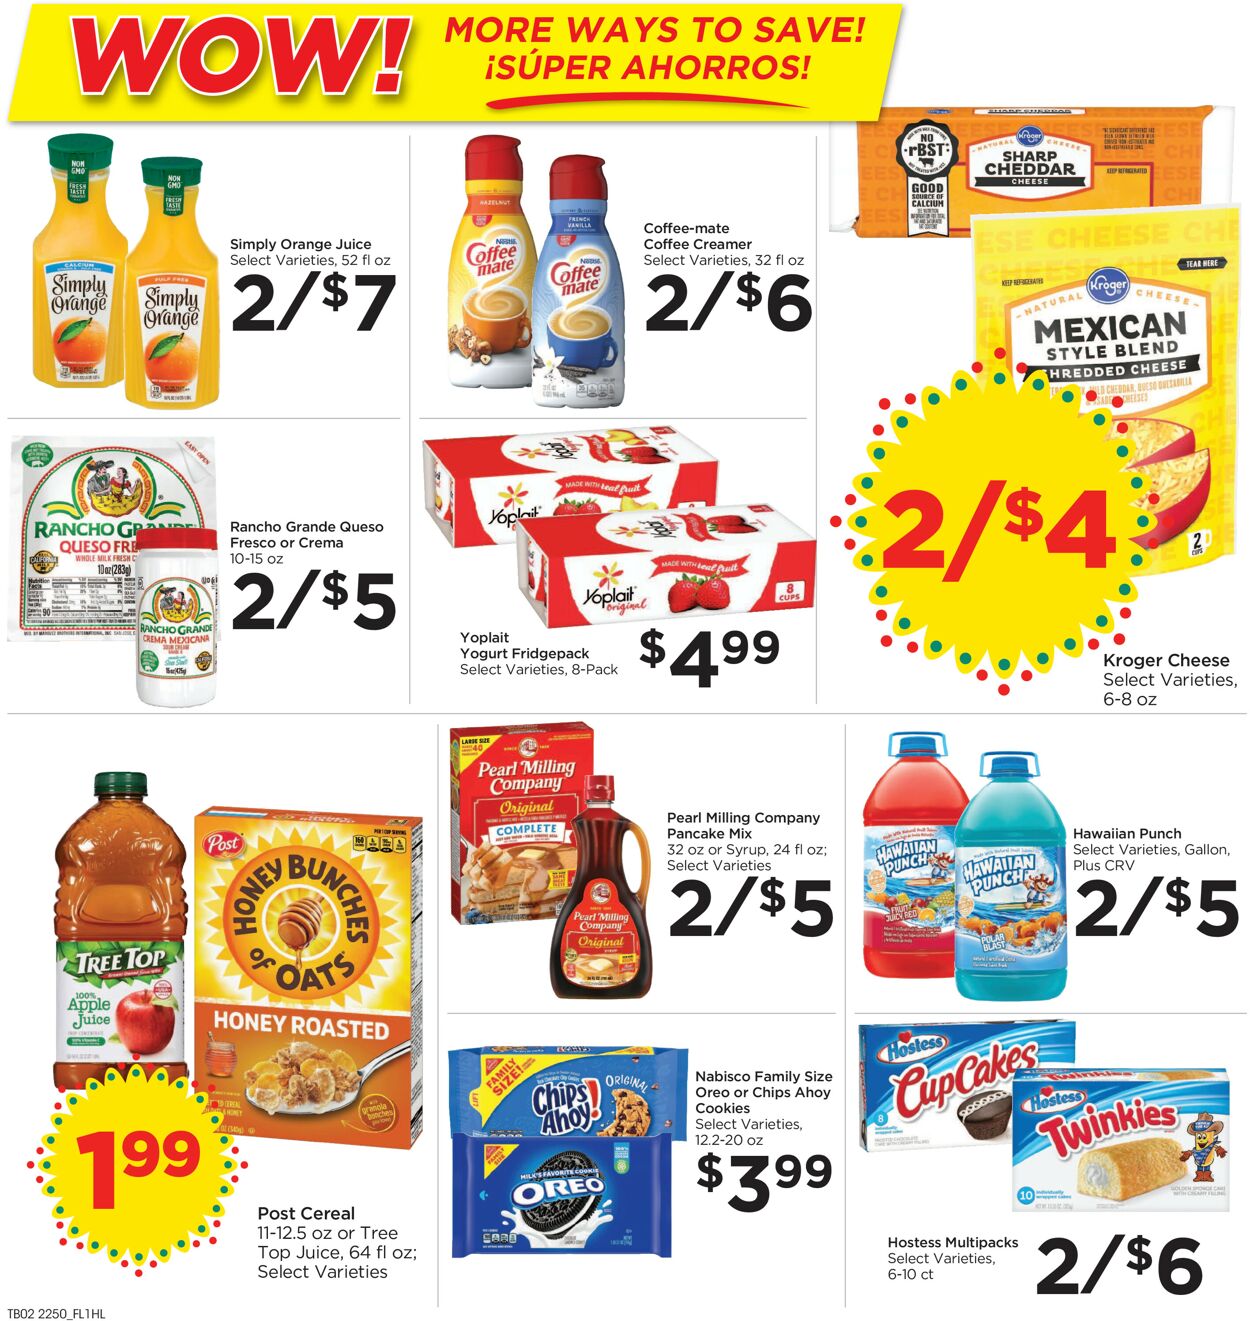 Catalogue Food 4 Less from 01/11/2023